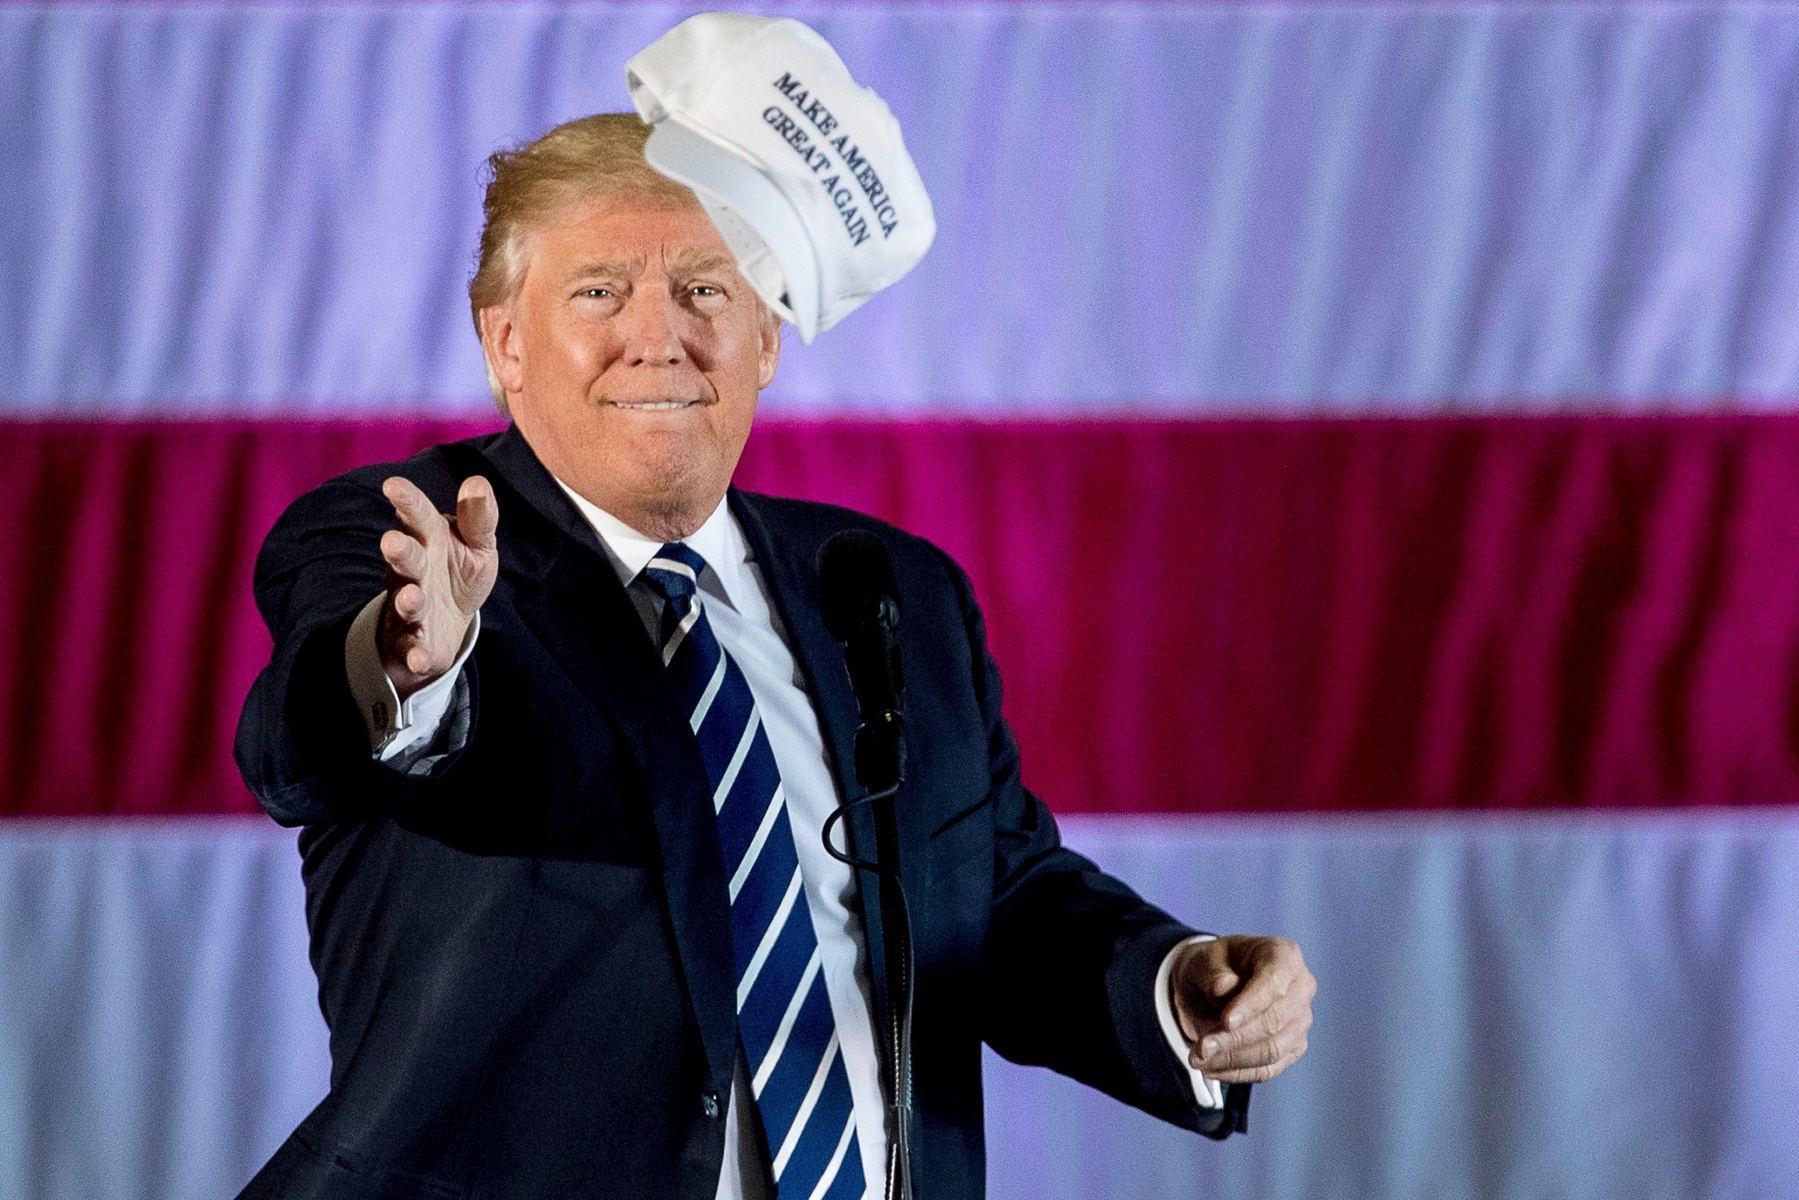 President-elect Donald Trump throws a hat into the audience while speaking at a rally in a DOW Chemical Hanger at Baton Rouge Metropolitan Airport, Friday, Dec. 9, 2016, in Baton Rouge, La. (AP Photo/Andrew Harnik) Trump